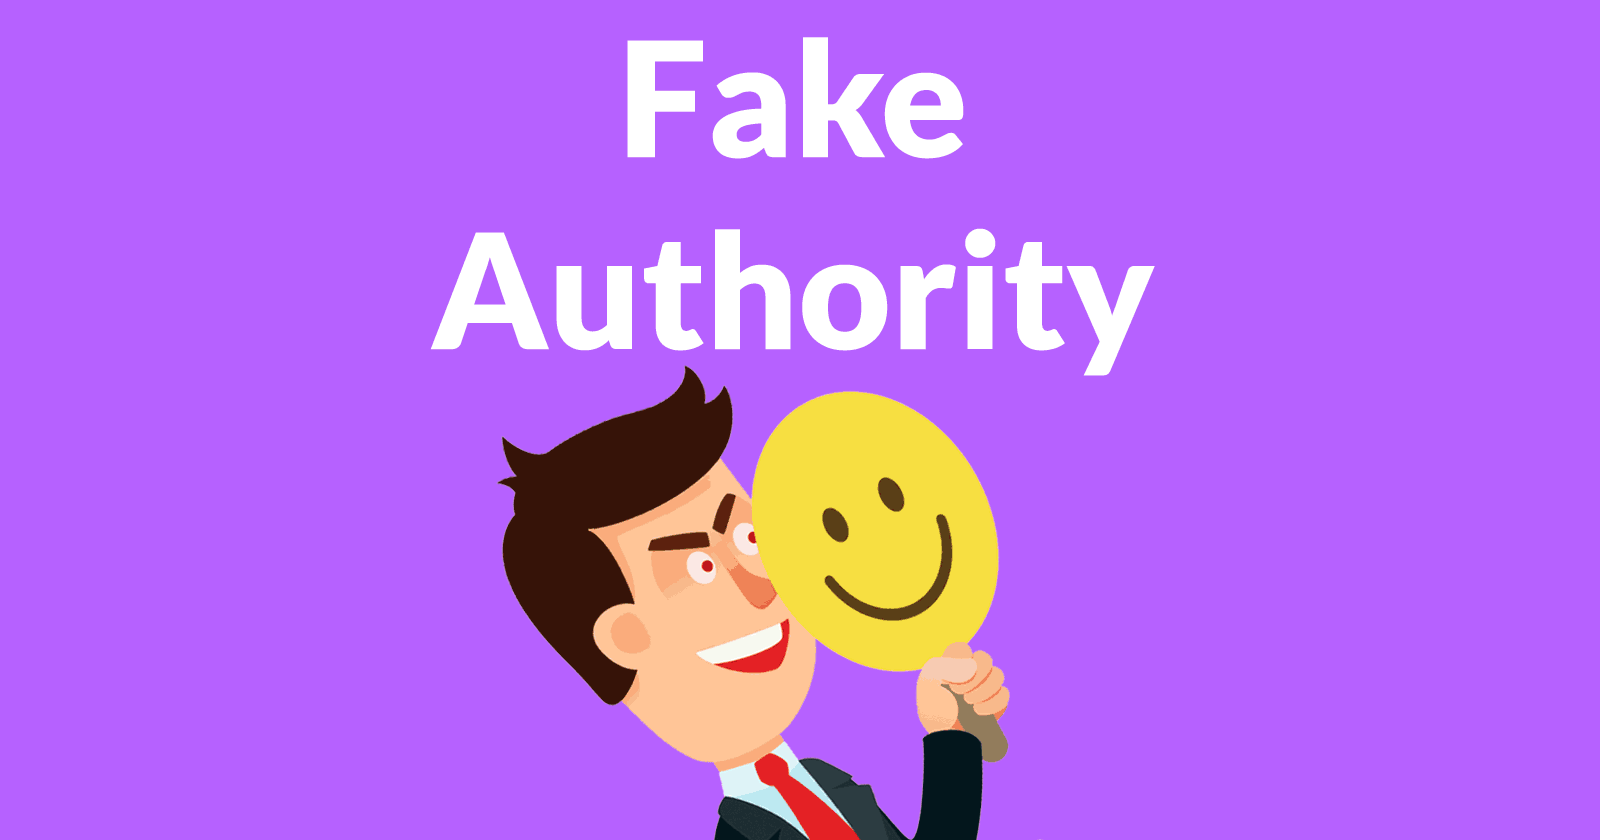 Image of a man holding a smiley face mask over his face, with the words,Fake Authority written above him.